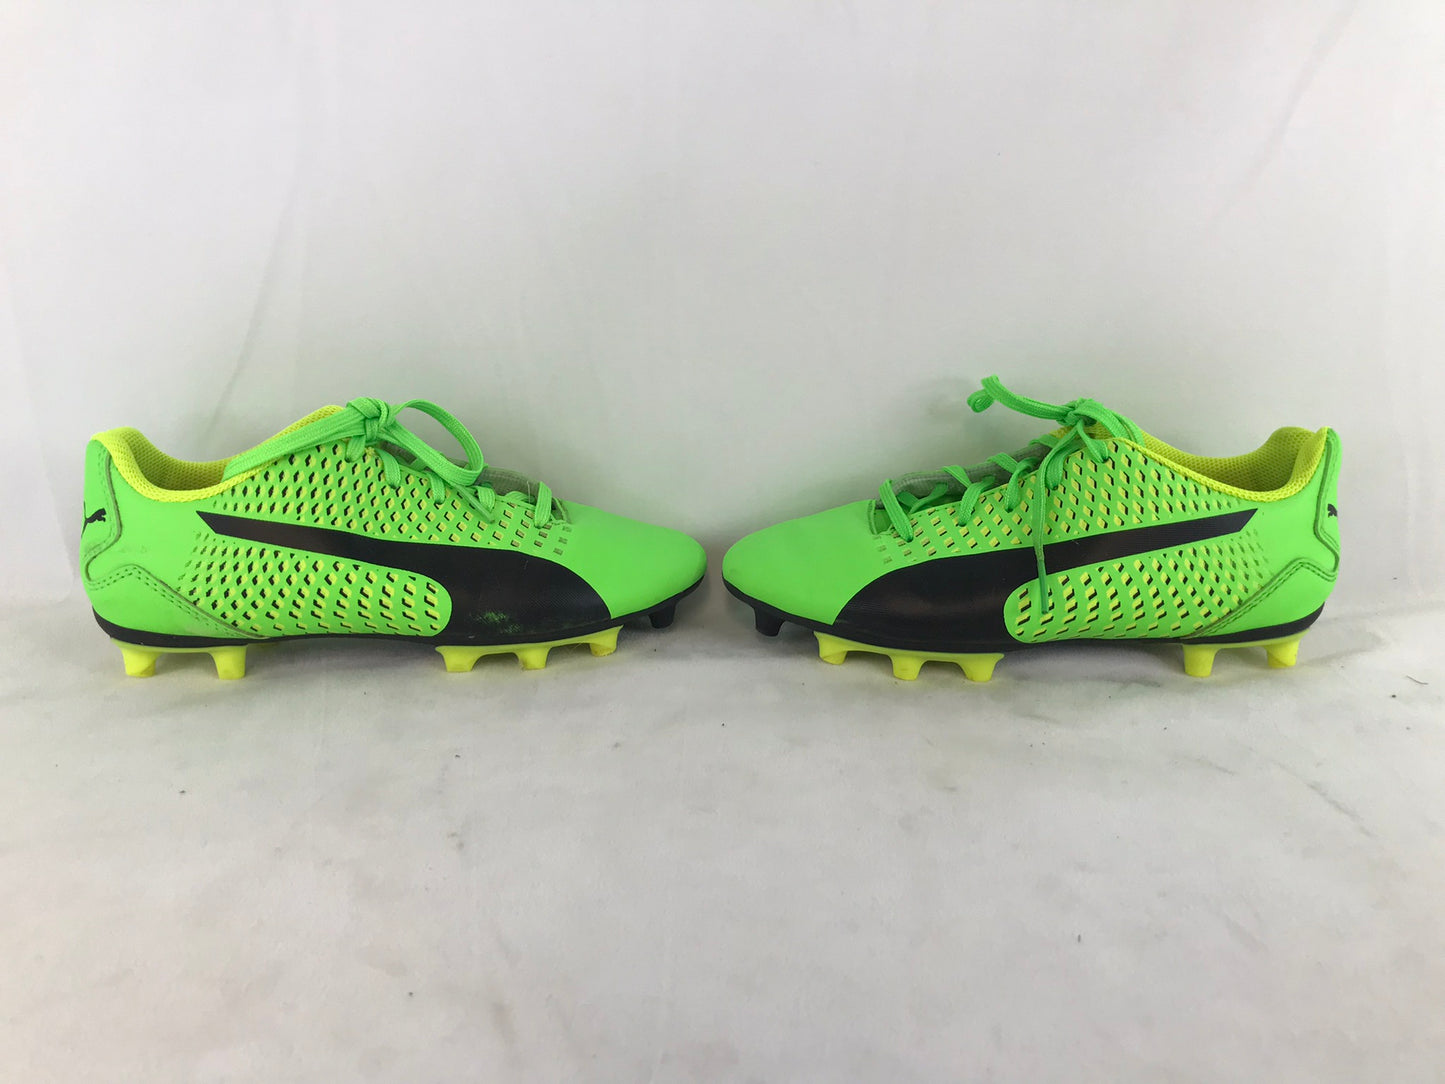 Soccer Shoes Cleats Child Size 3.5 Puma Green Black Lime Excellent